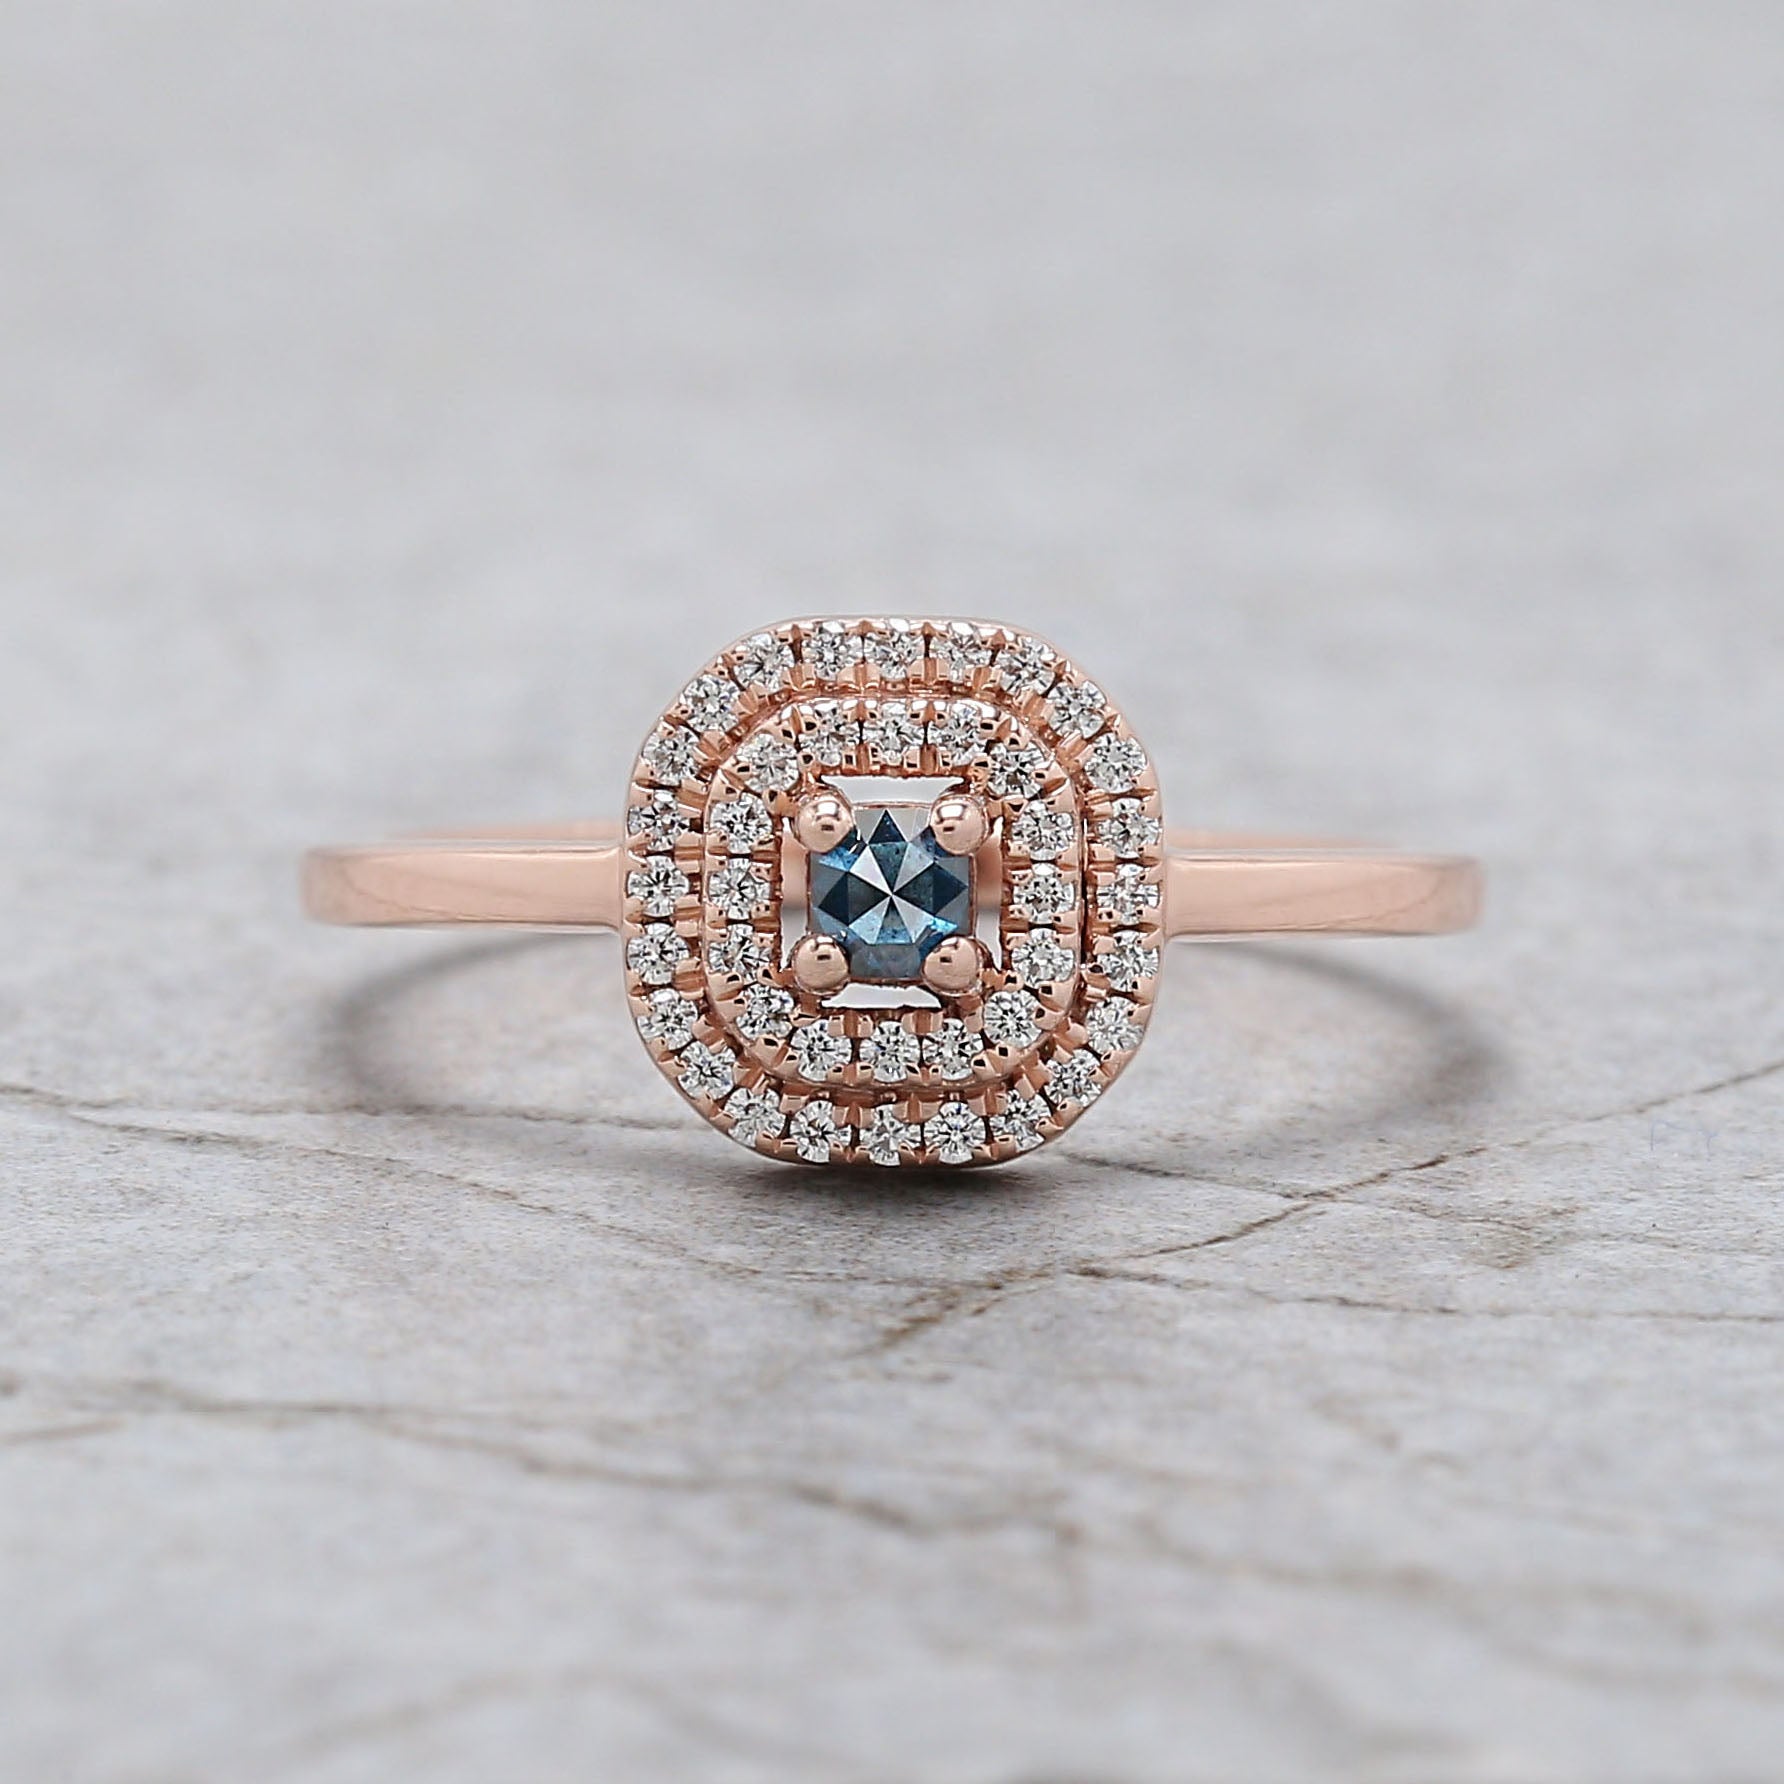 Cushion Blue Color Diamond Ring Engagement Wedding Gift Ring 14K Solid Rose White Yellow Gold Ring 0.11 CT KD1062